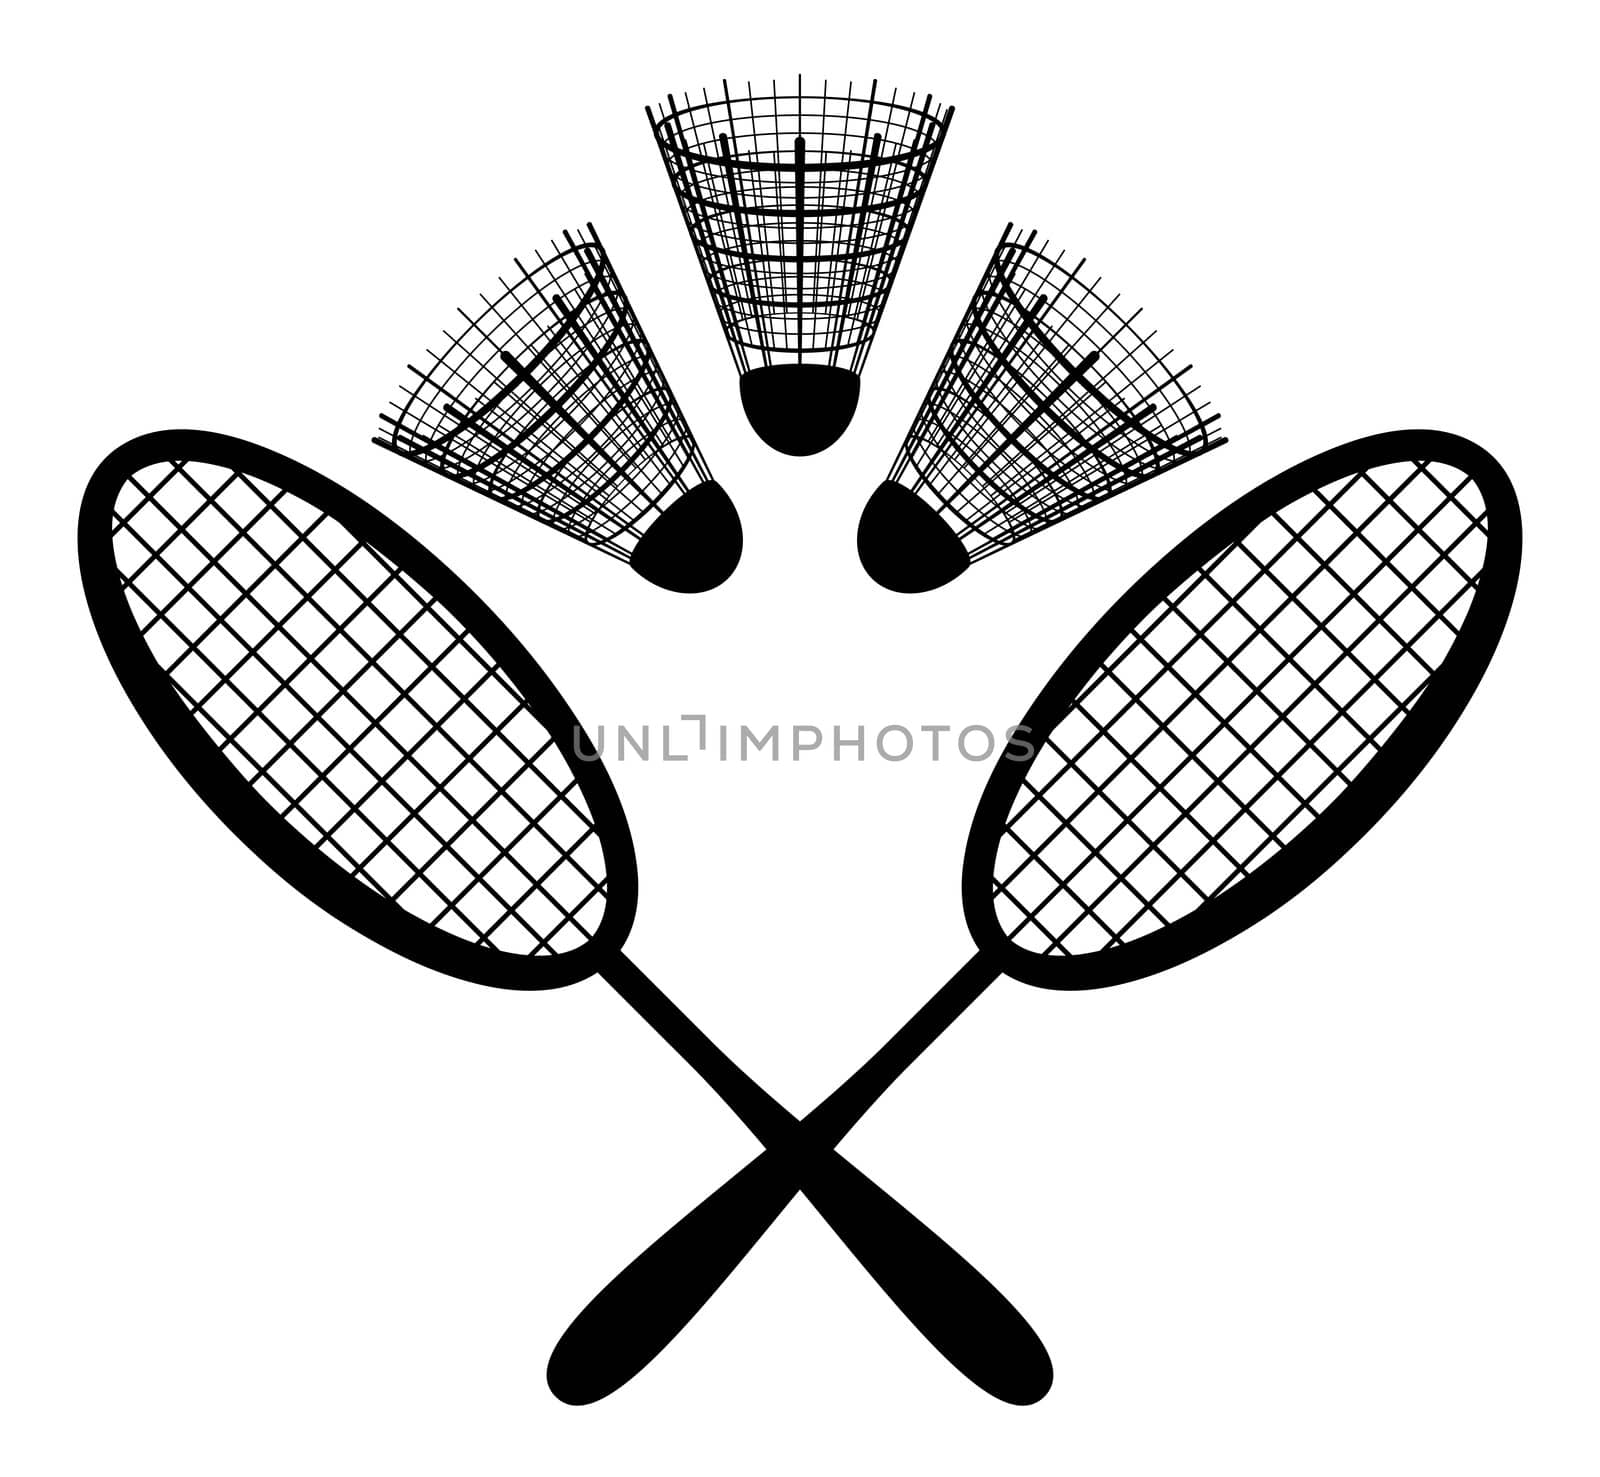 Set objects of sporting equipment for badminton game: rackets and shuttlecocks, black silhouette on white background. Vector